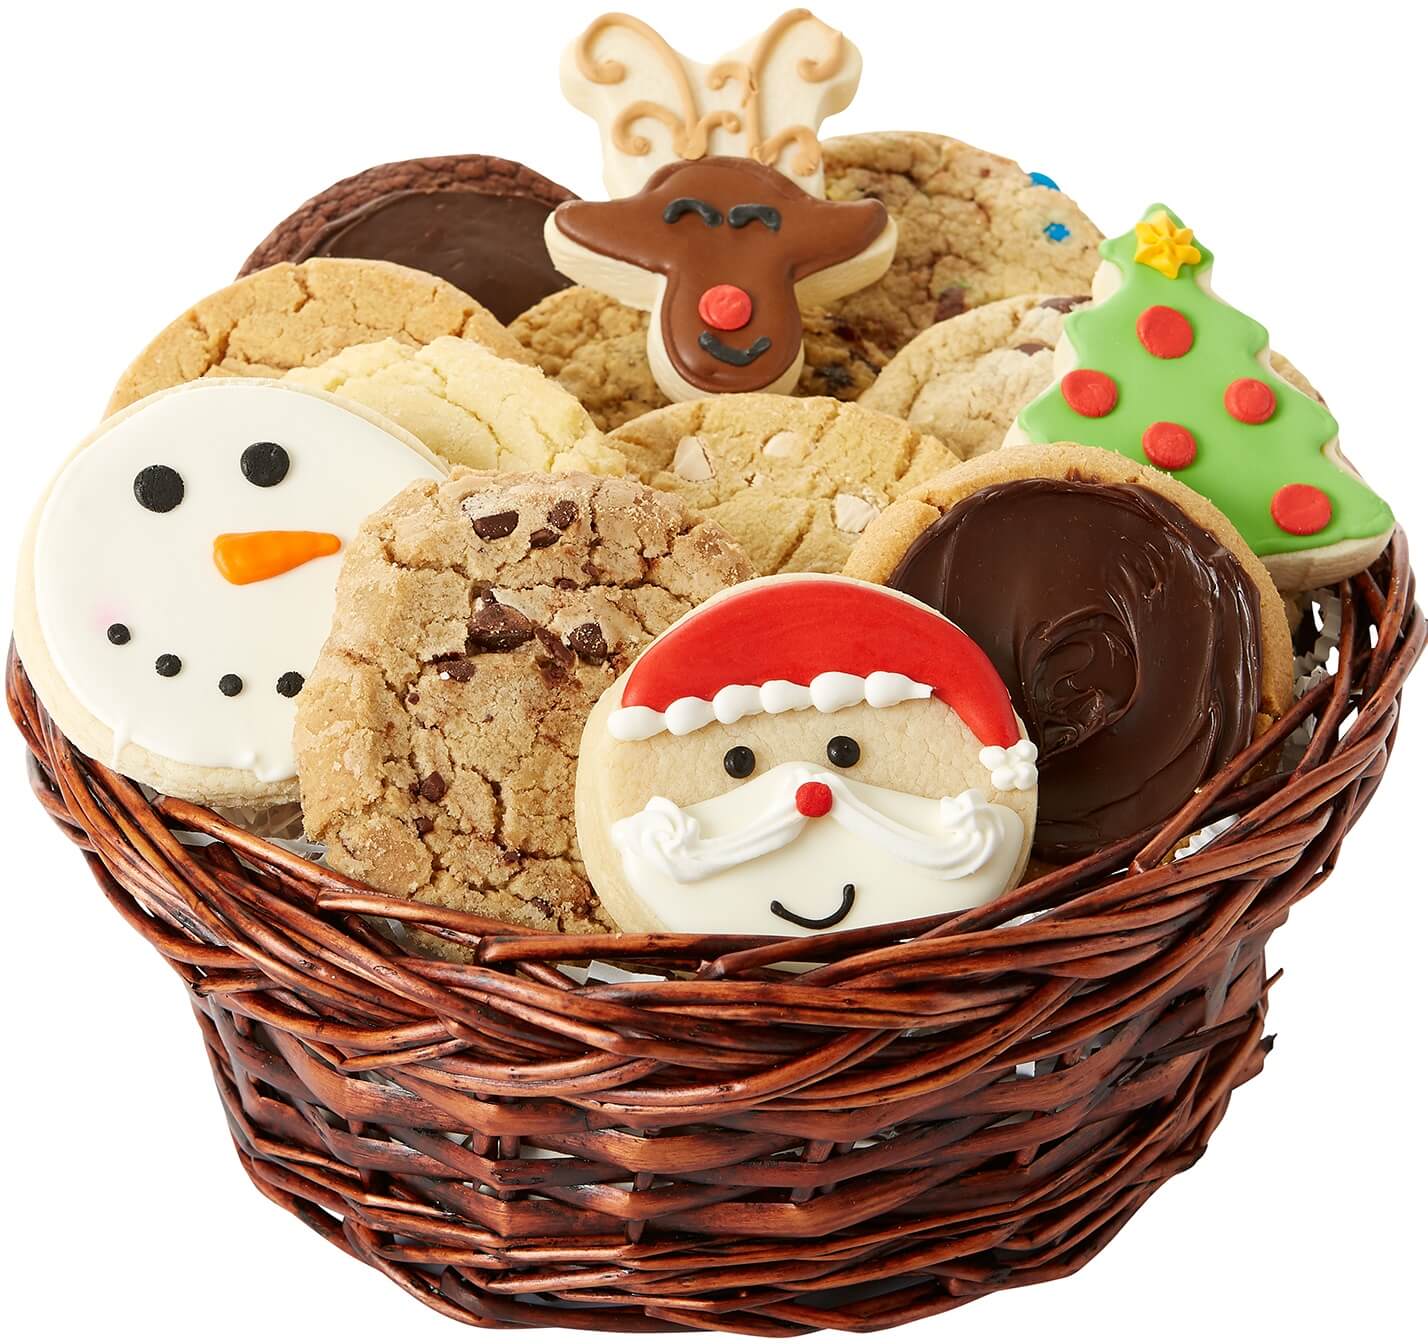 Irish Christmas Cookies Diabetic Irish Christmas Cookie Recipes Gingerbread Ireland Refers To The Holiday Not Like Everyone Else Looks At It With A Special Look And Therefore Christmas